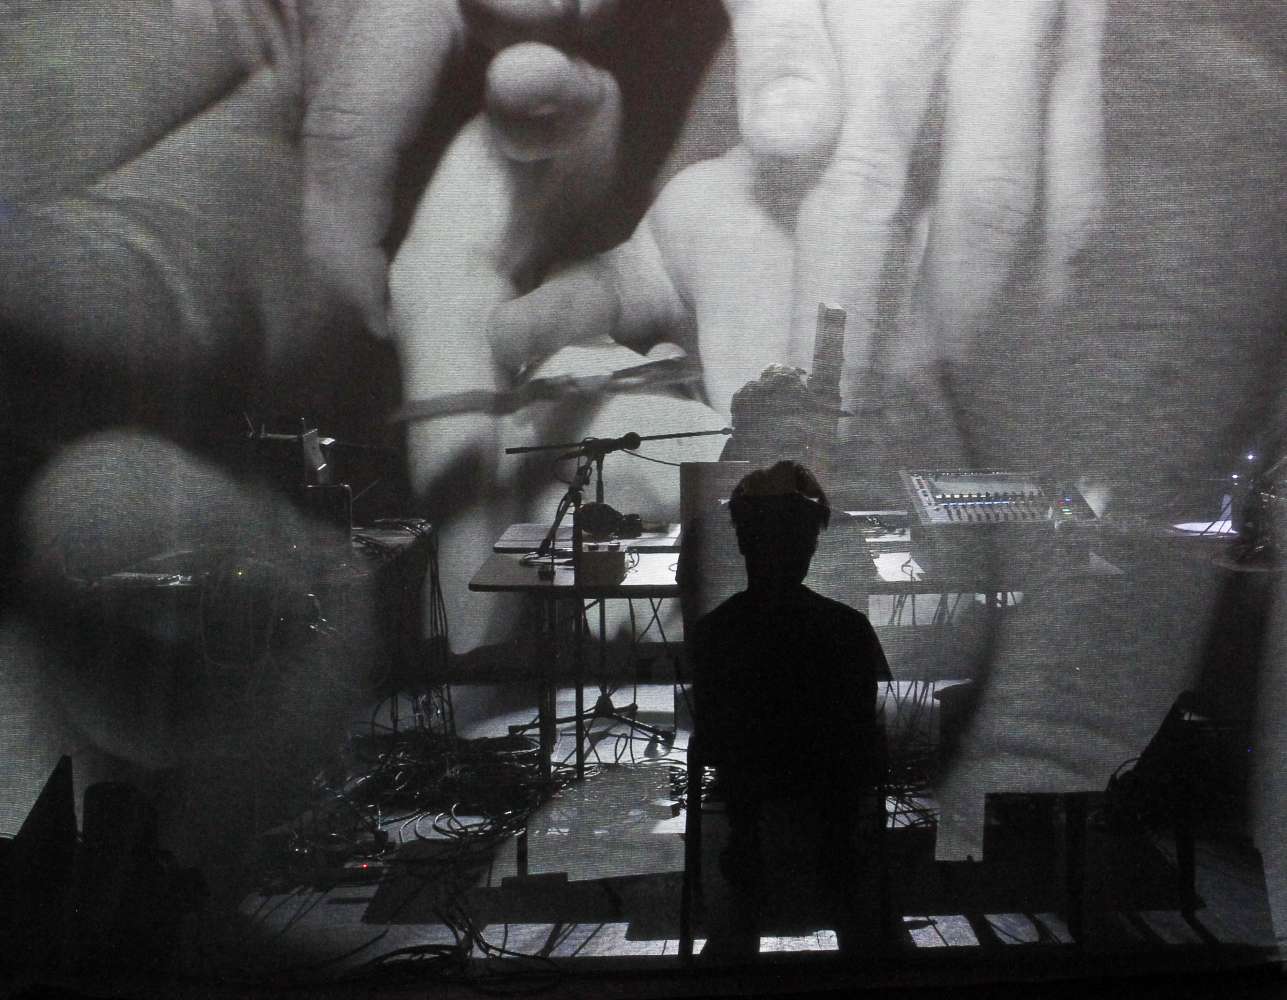 Image of a performer and equipment against a large screen projection of intertwined hands